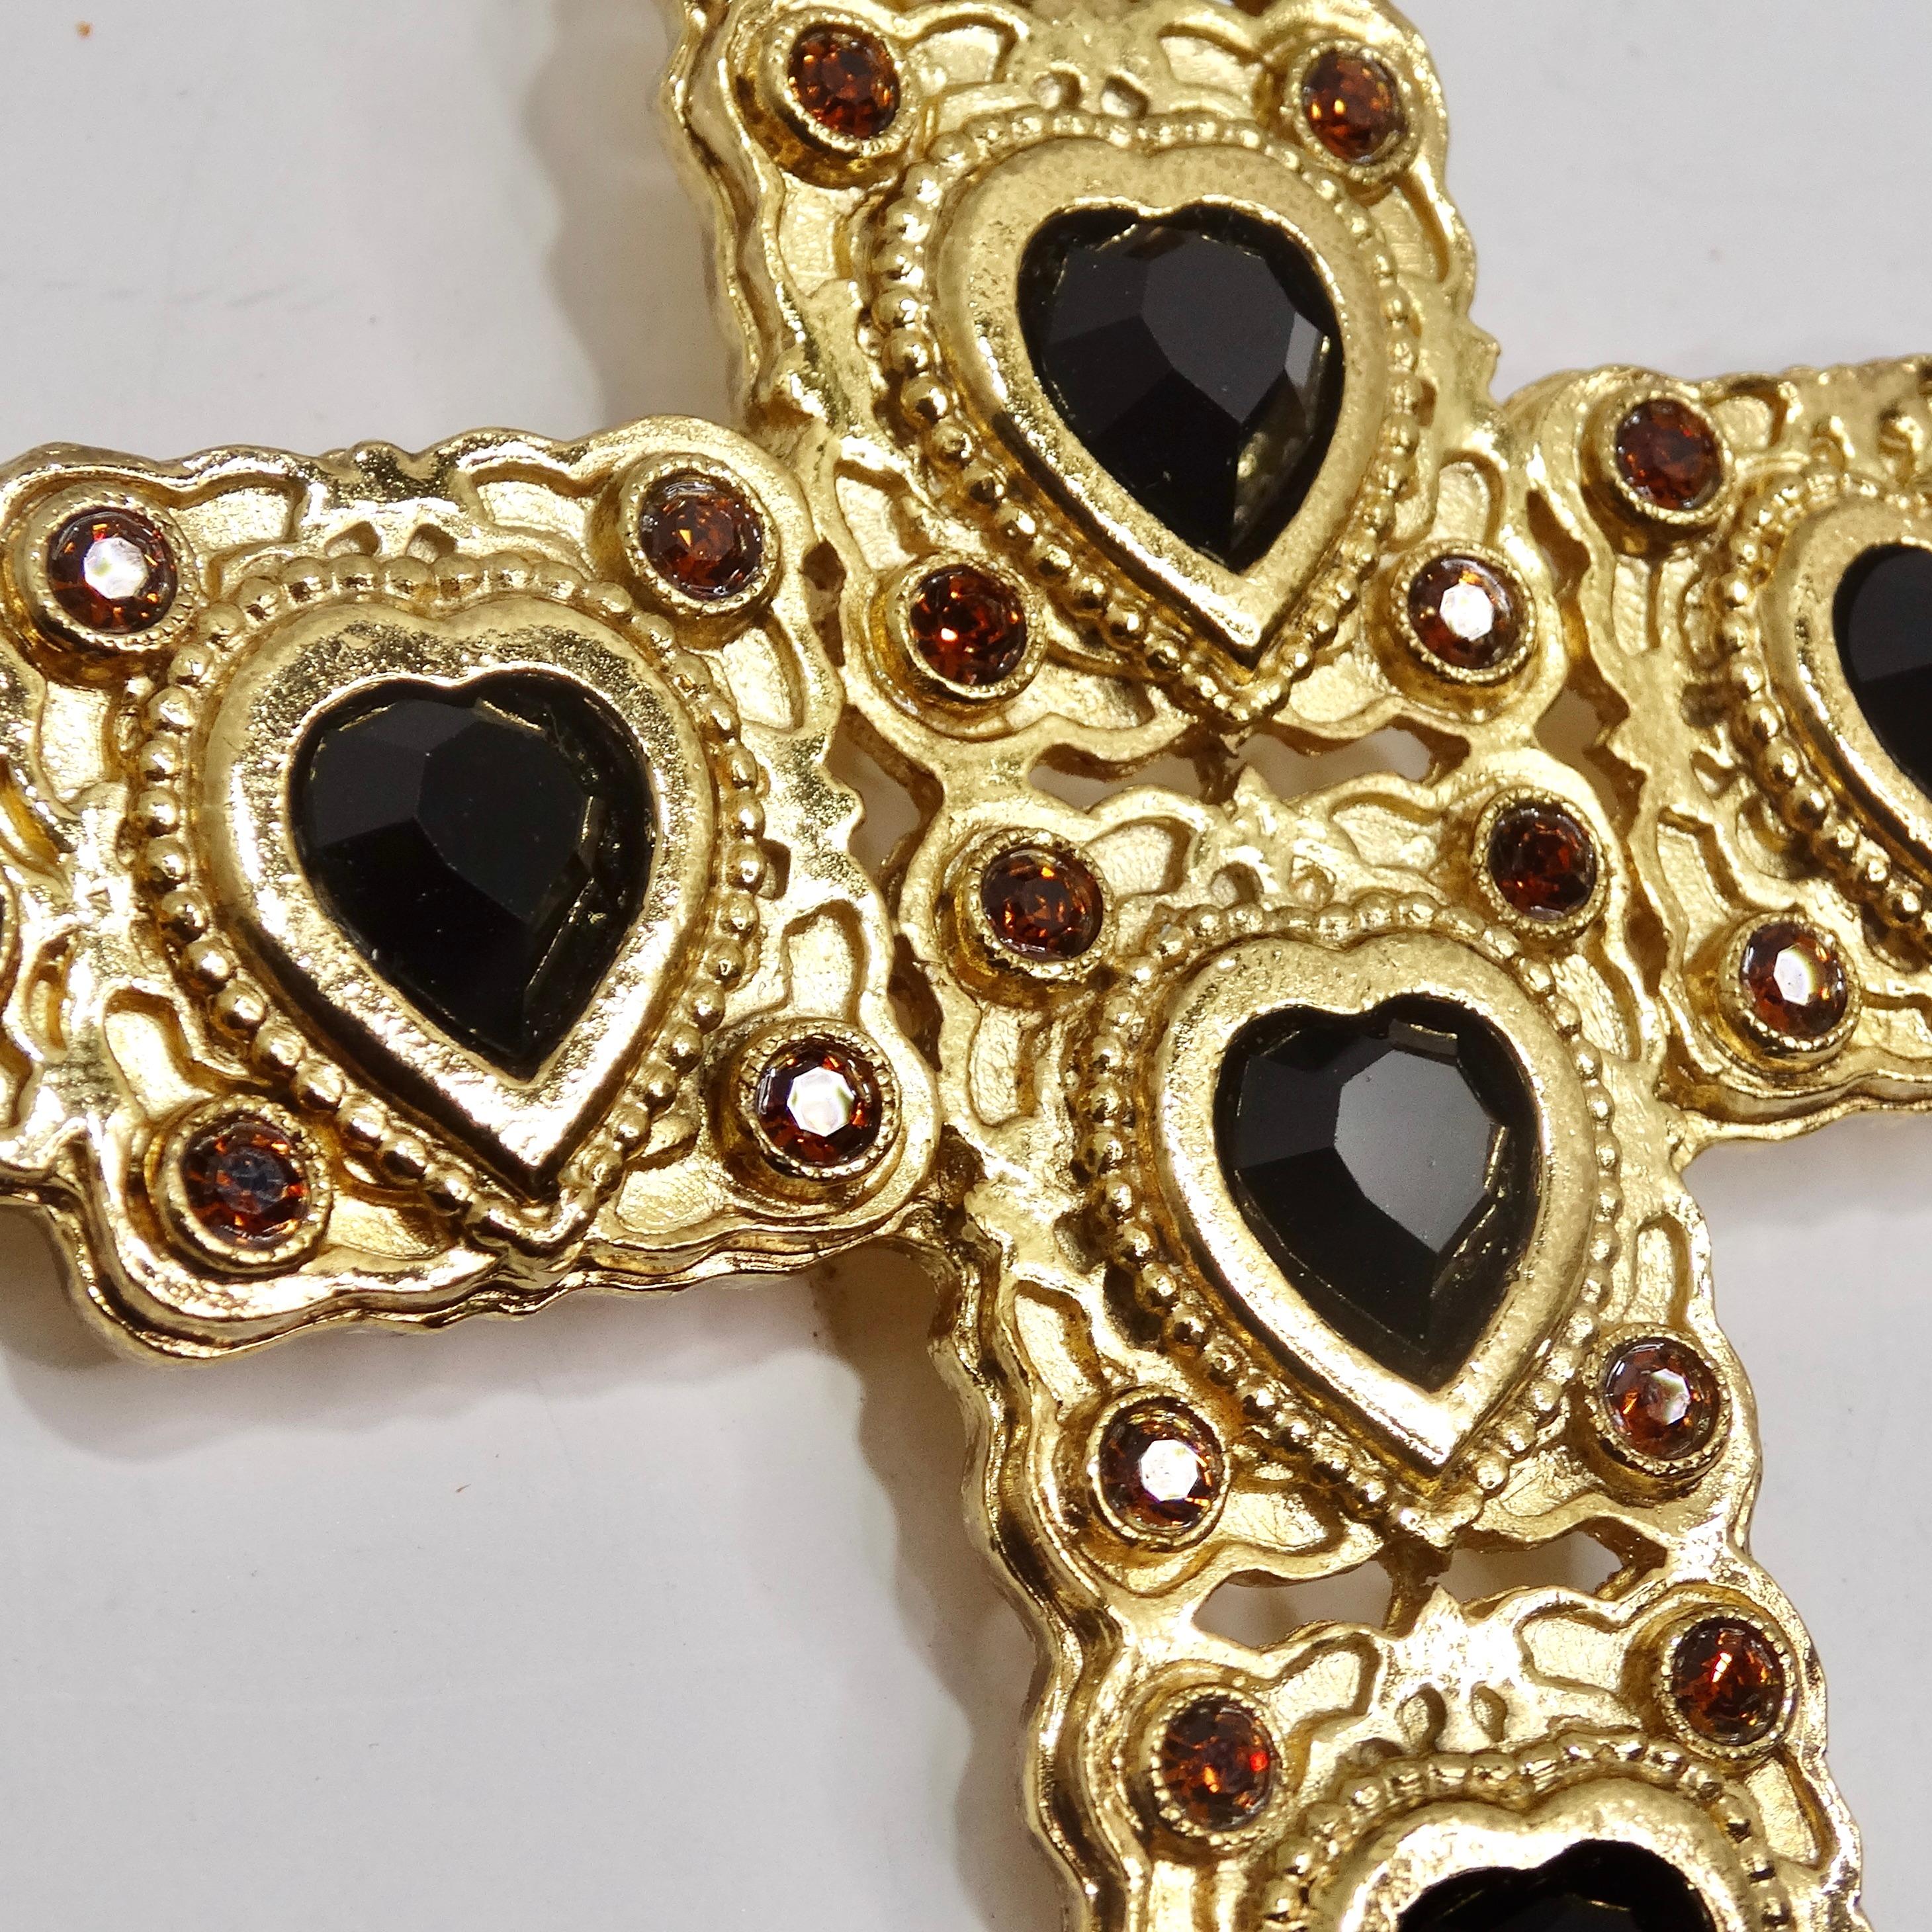 Butler & Wilson 1980s Gold Tone Black Stone Cross Brooch In Excellent Condition For Sale In Scottsdale, AZ